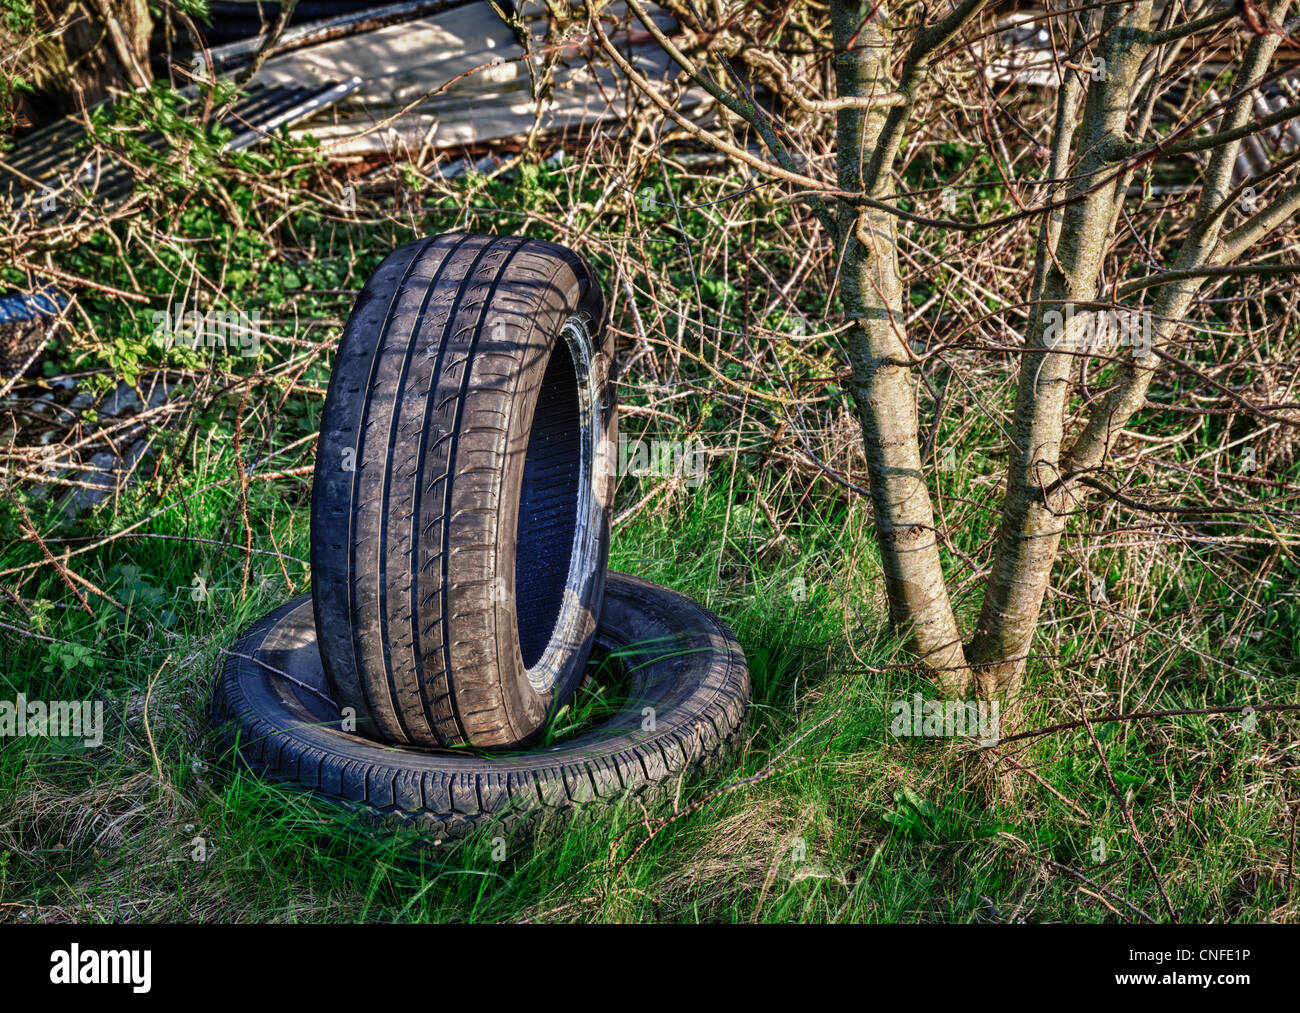 Dumped car tyres abandoned in overgrown field Stock Photo